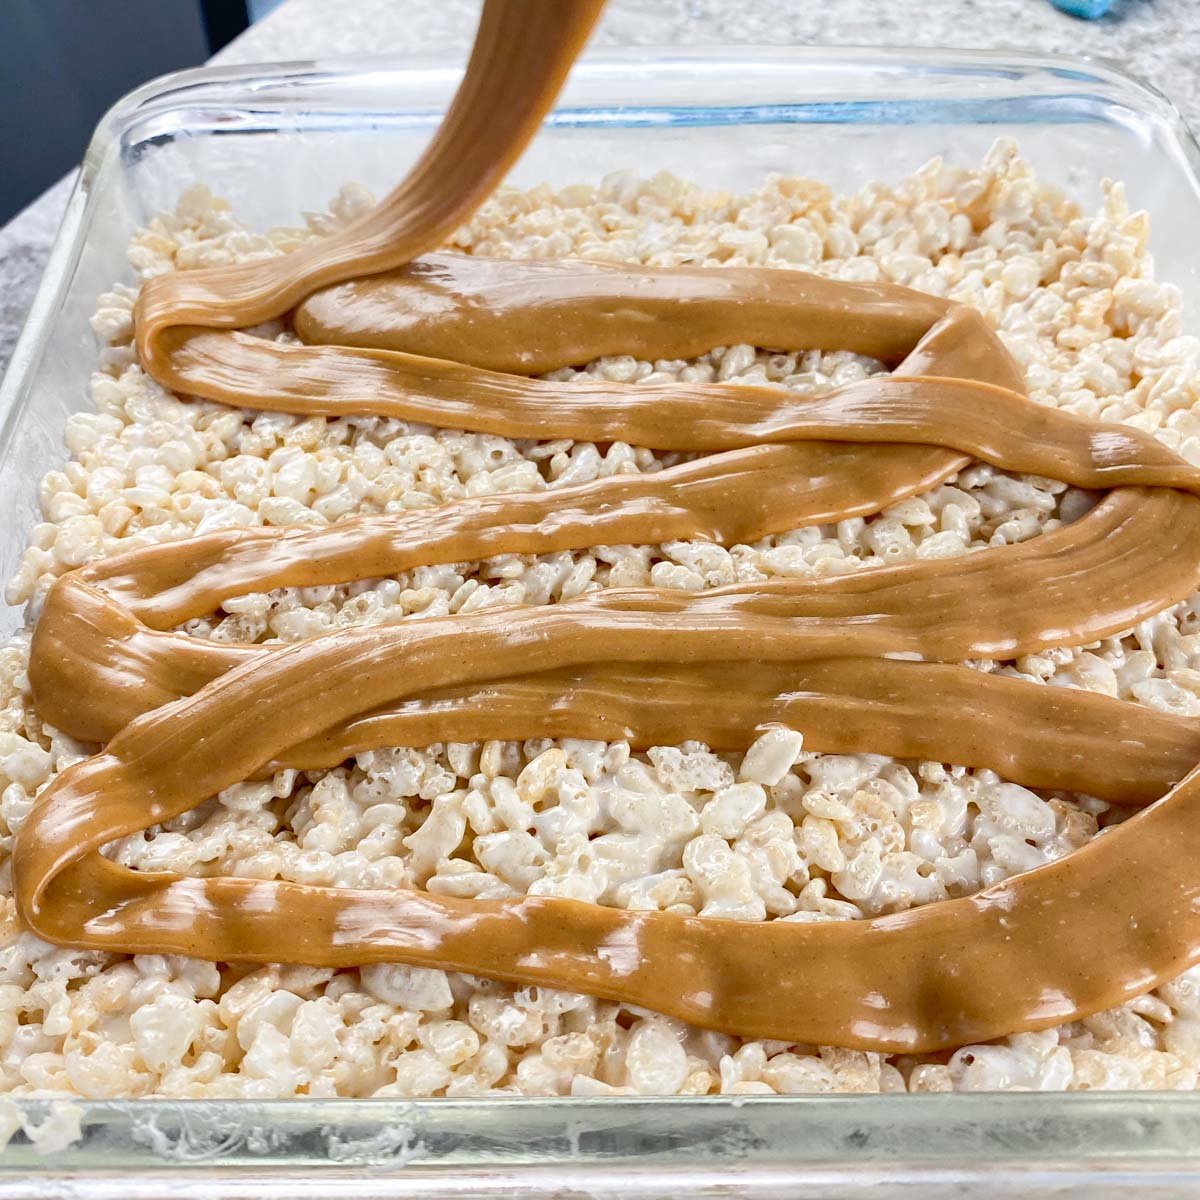 Caramel sauce being pour over Rice Krispie treat layer.